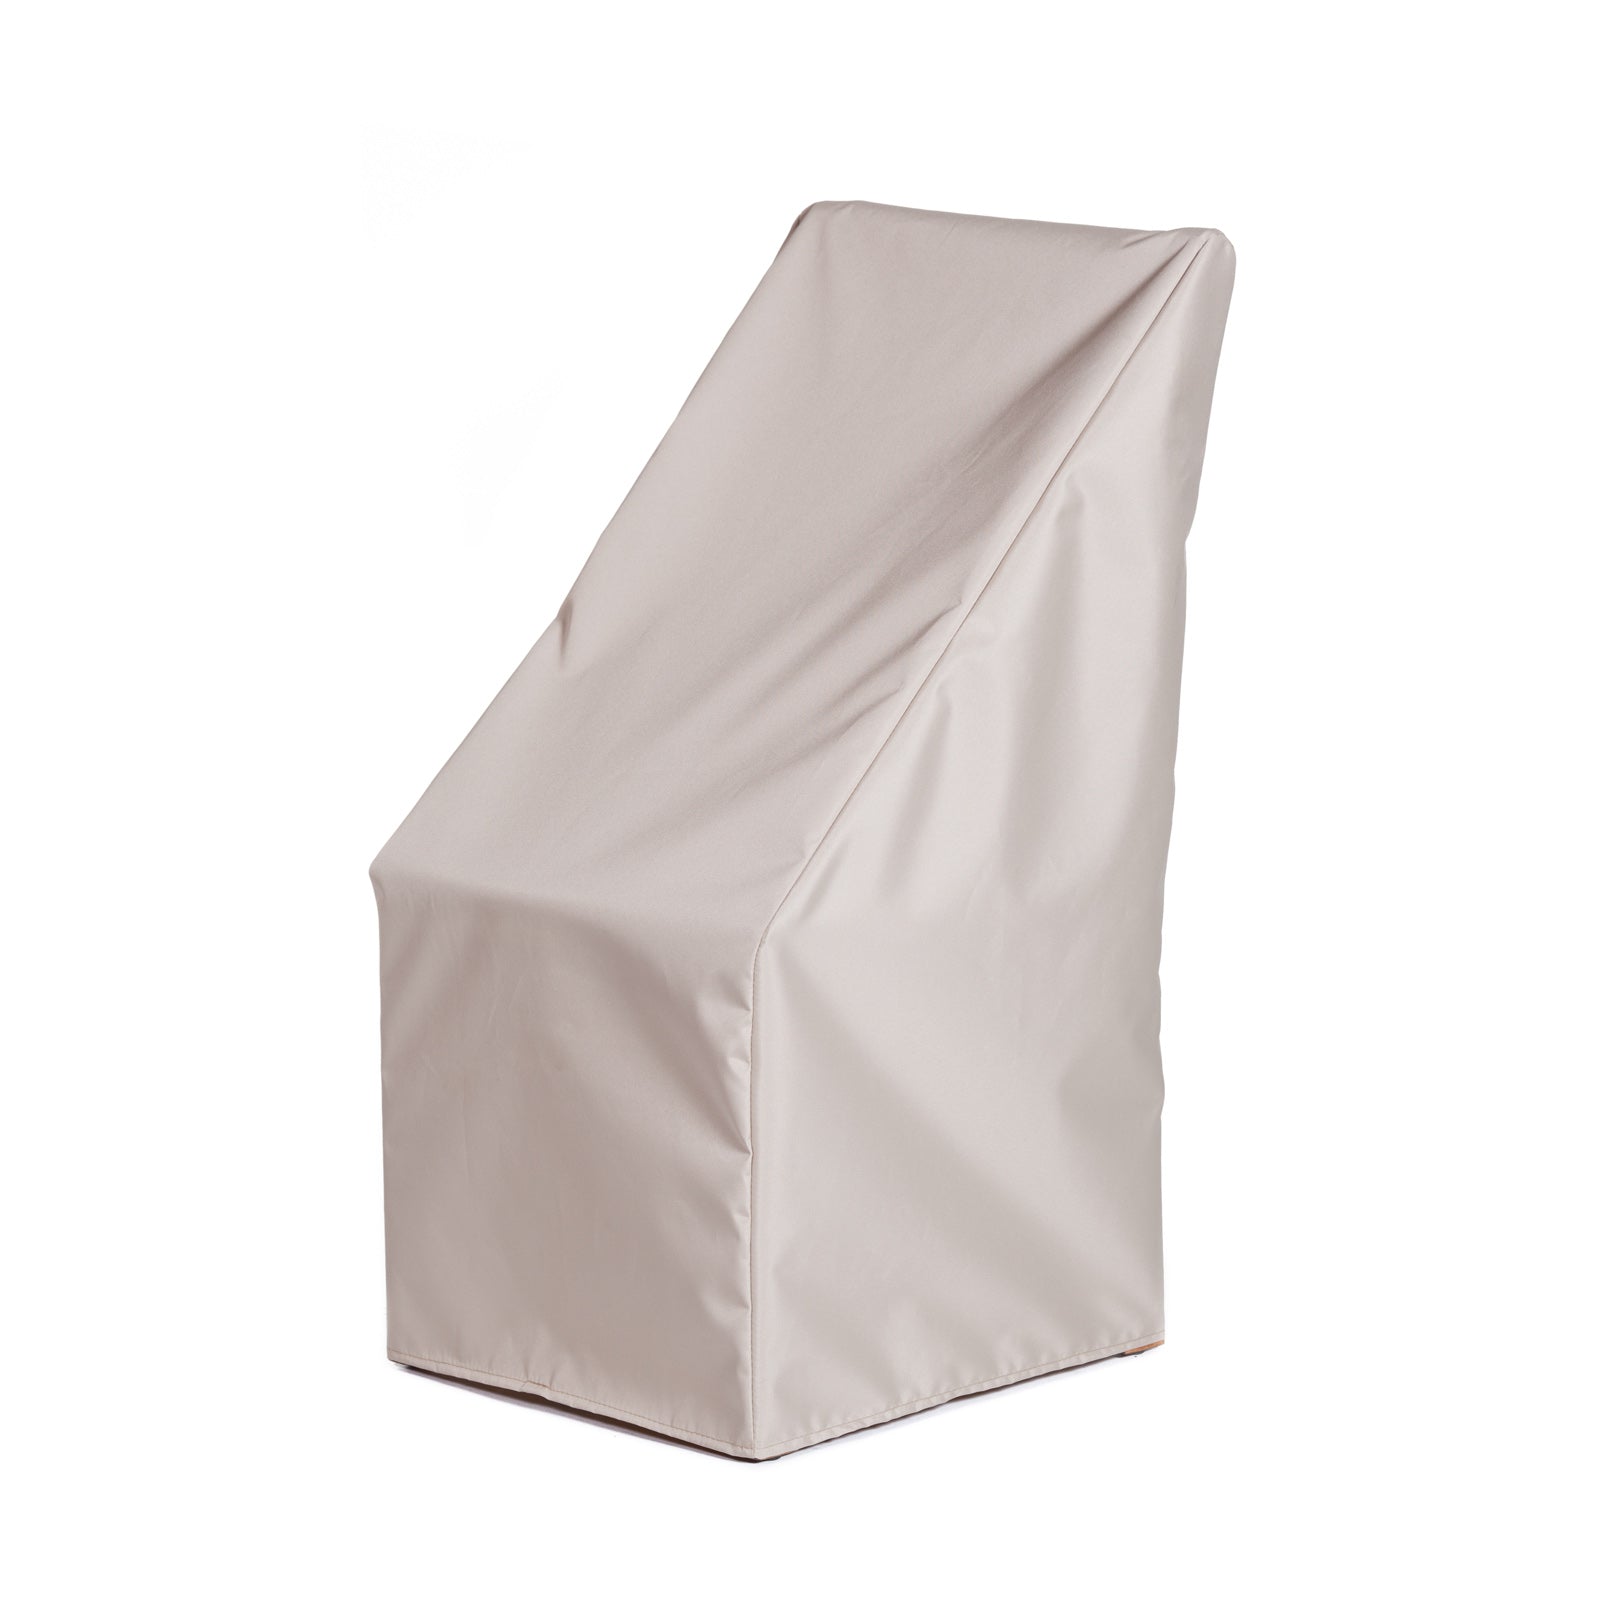 Westminster Teak - 12915 Odyssey Chair Cover Sur Last Light Grey 3862 Cover - 62915F